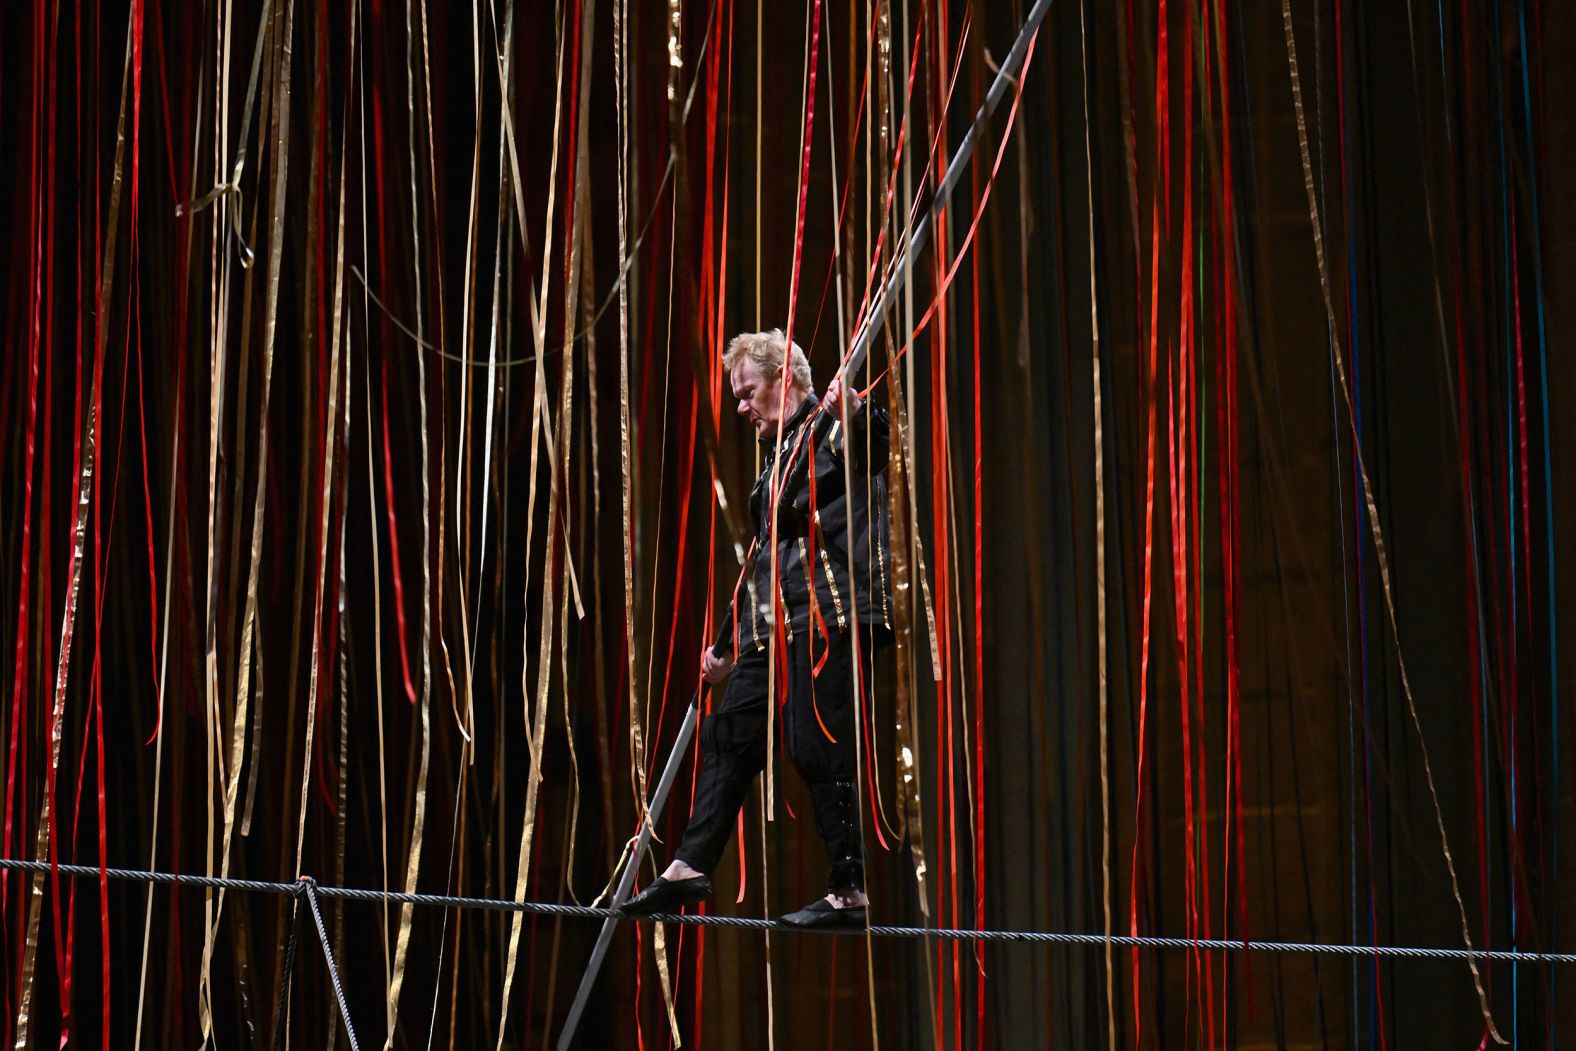 High-wire artist Philippe Petit performs "The Ribbon Walk" above an audience in New York on Thursday, February 1.